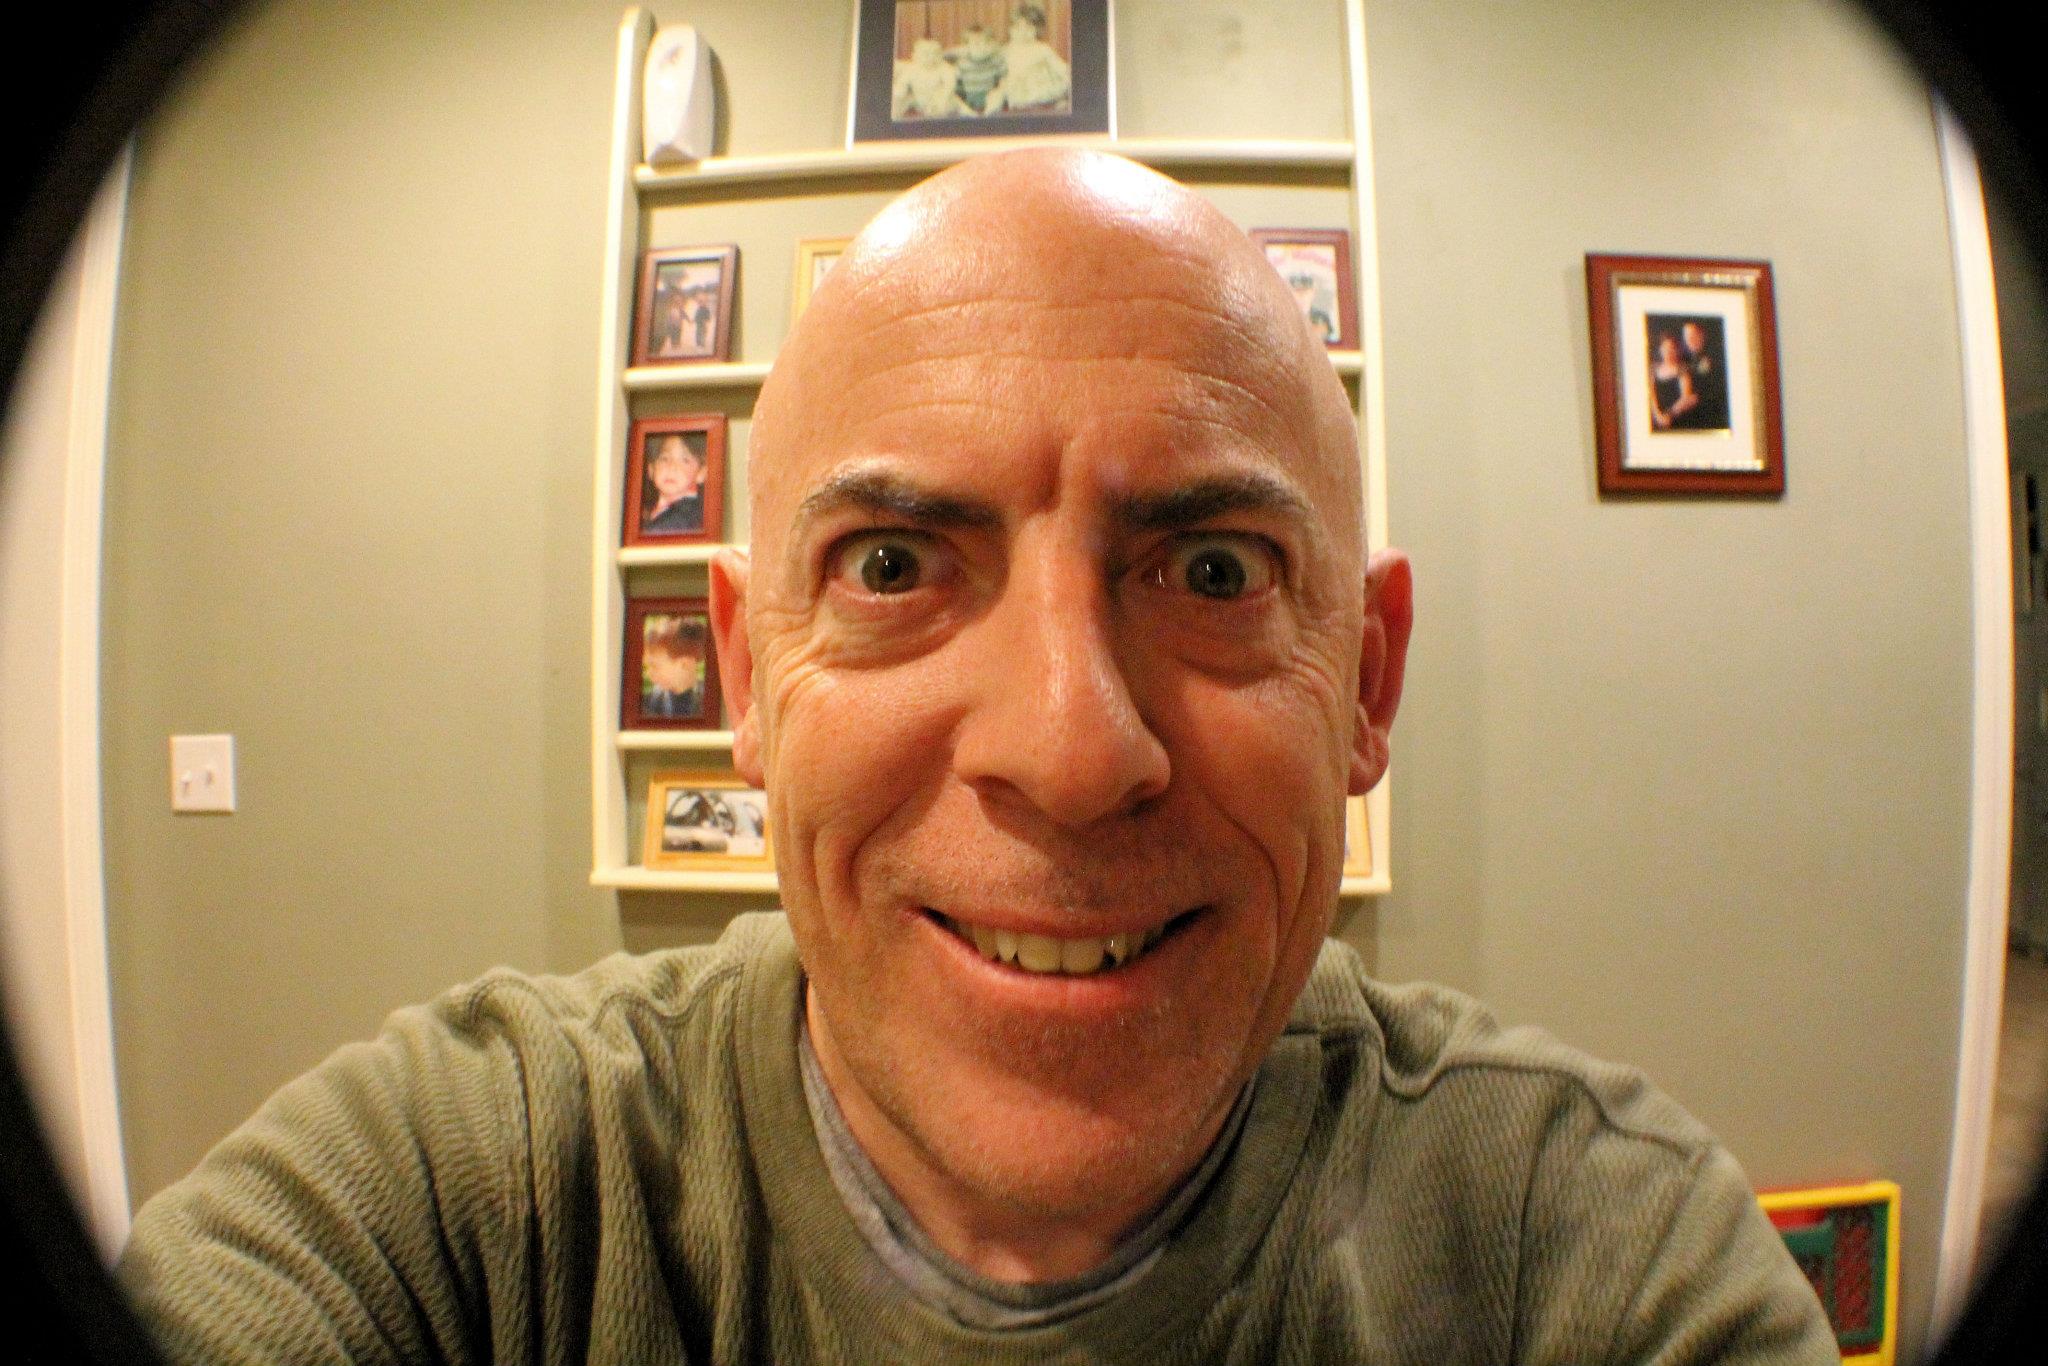 Experimenting with a new wide-angle lens, Feb. 2012. Glenn is an impassioned photographer.